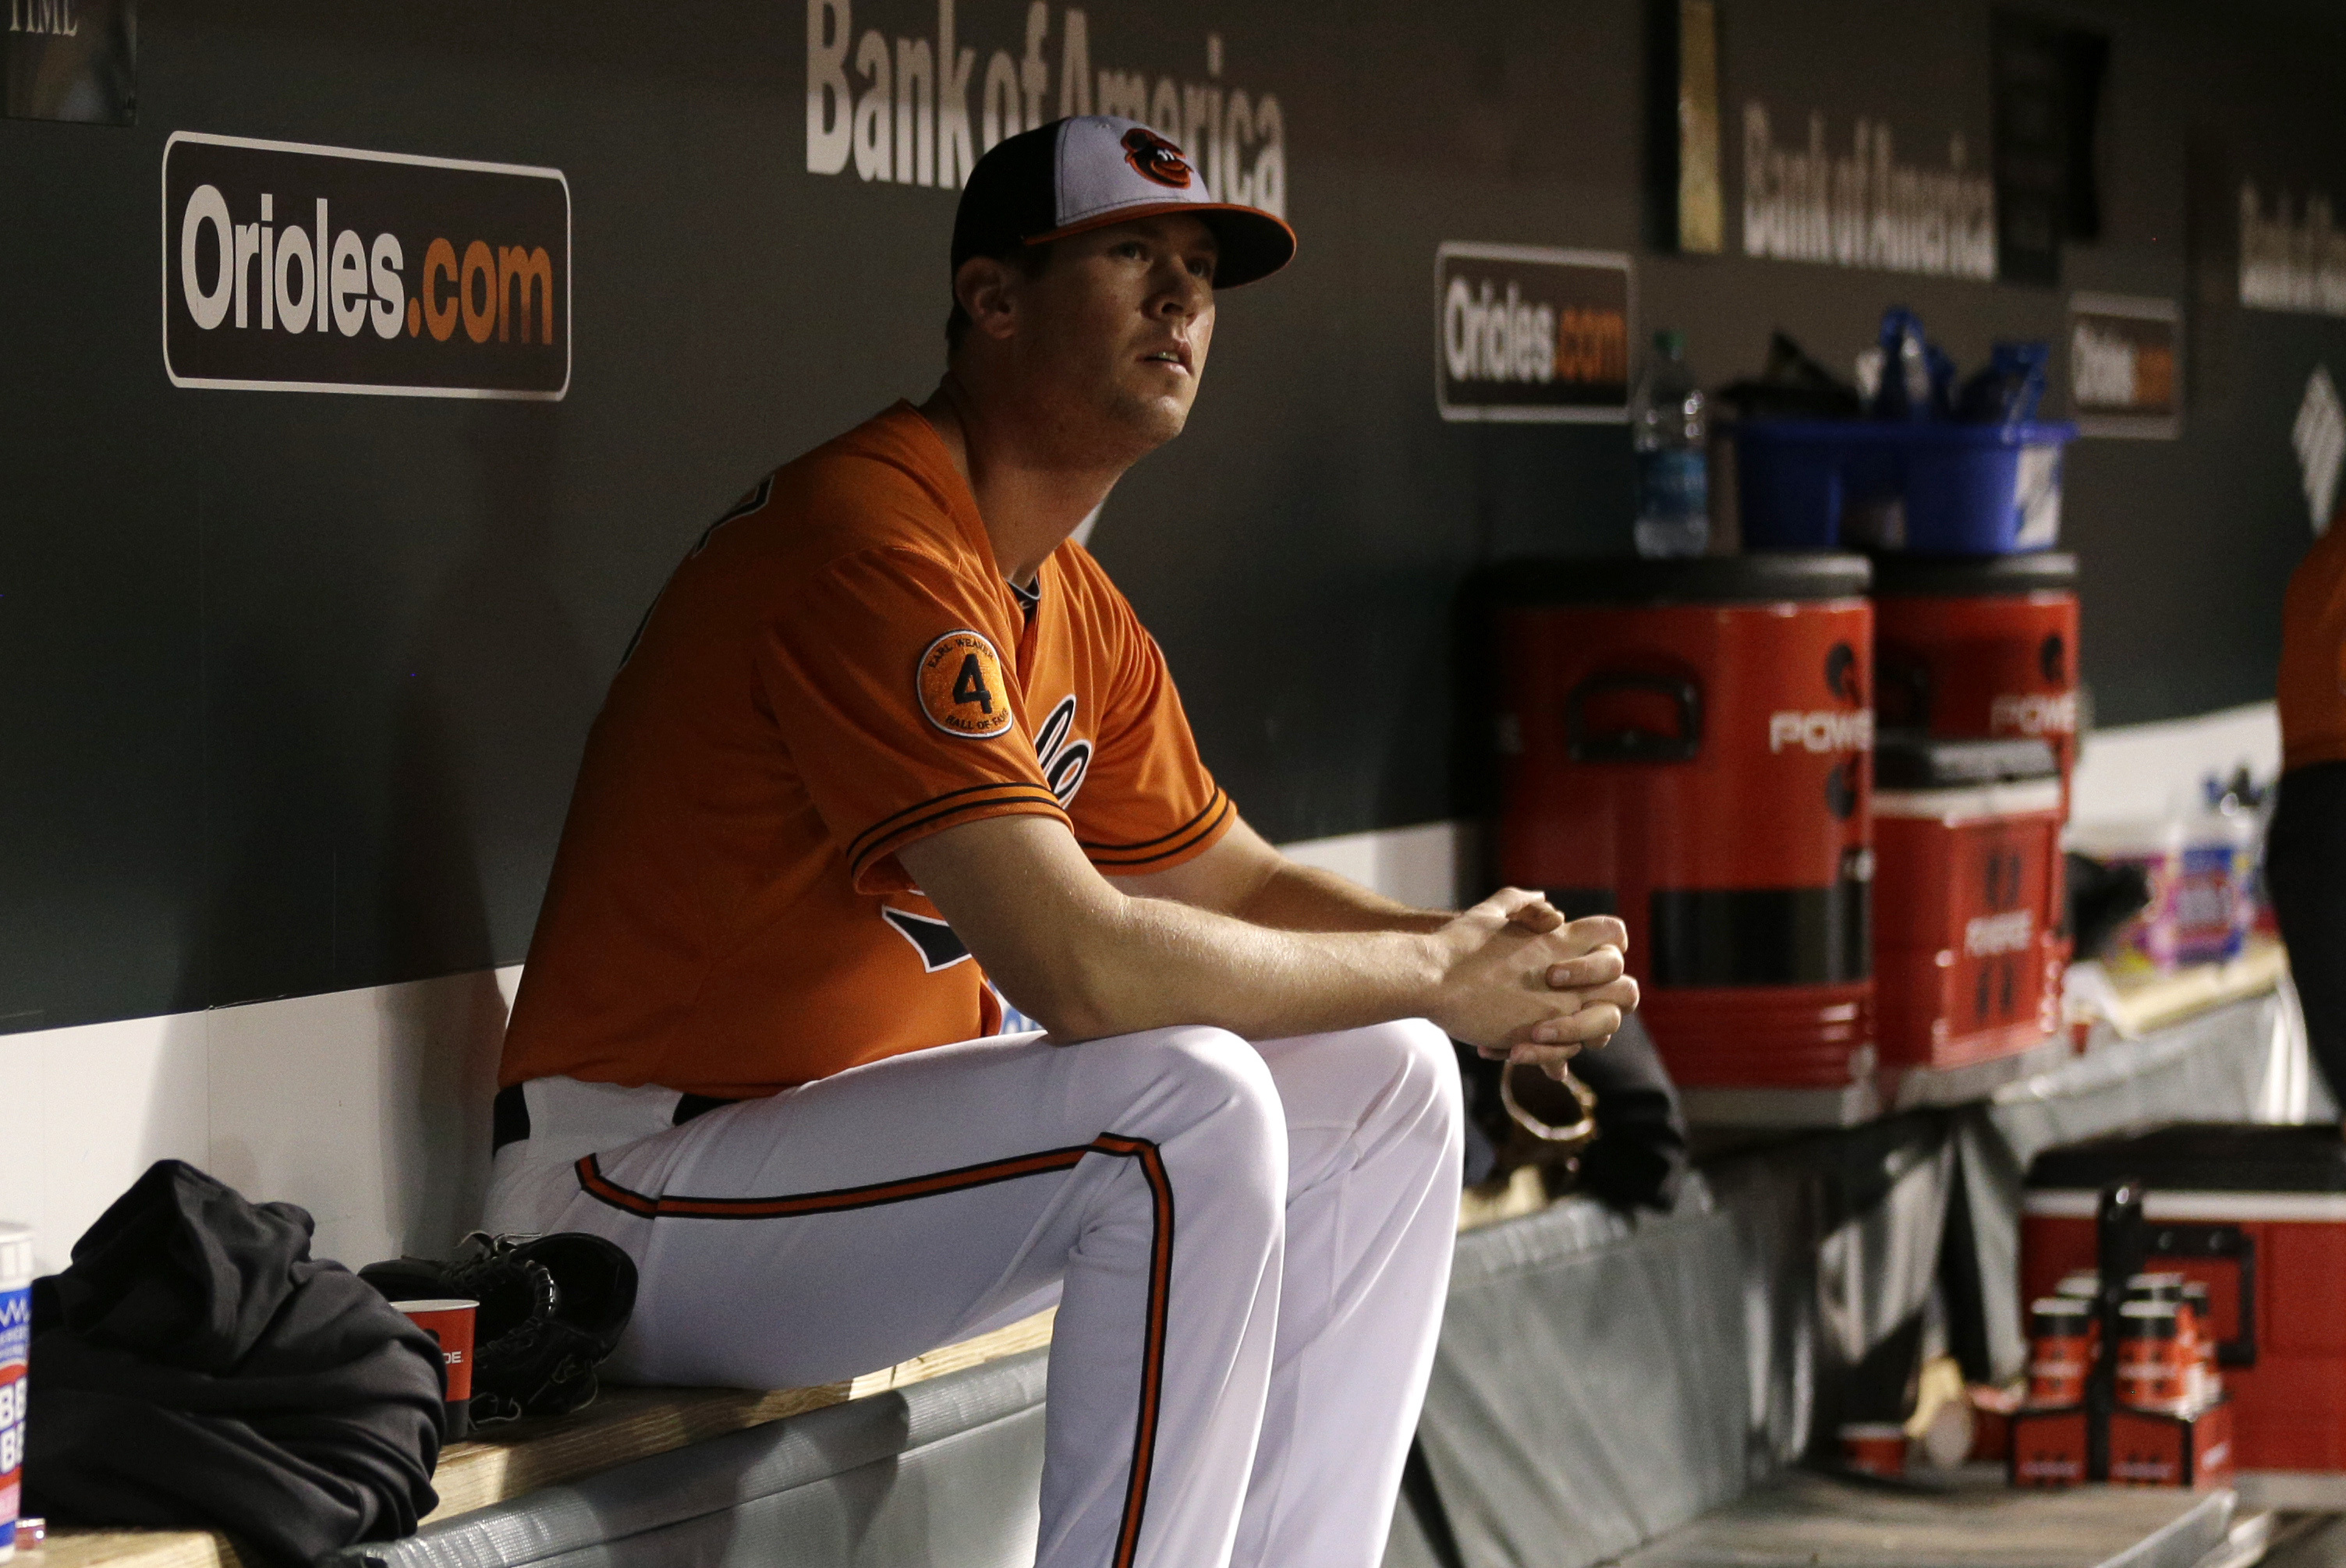 Astros trade Bud Norris to Orioles for prospects Hoes, Hader